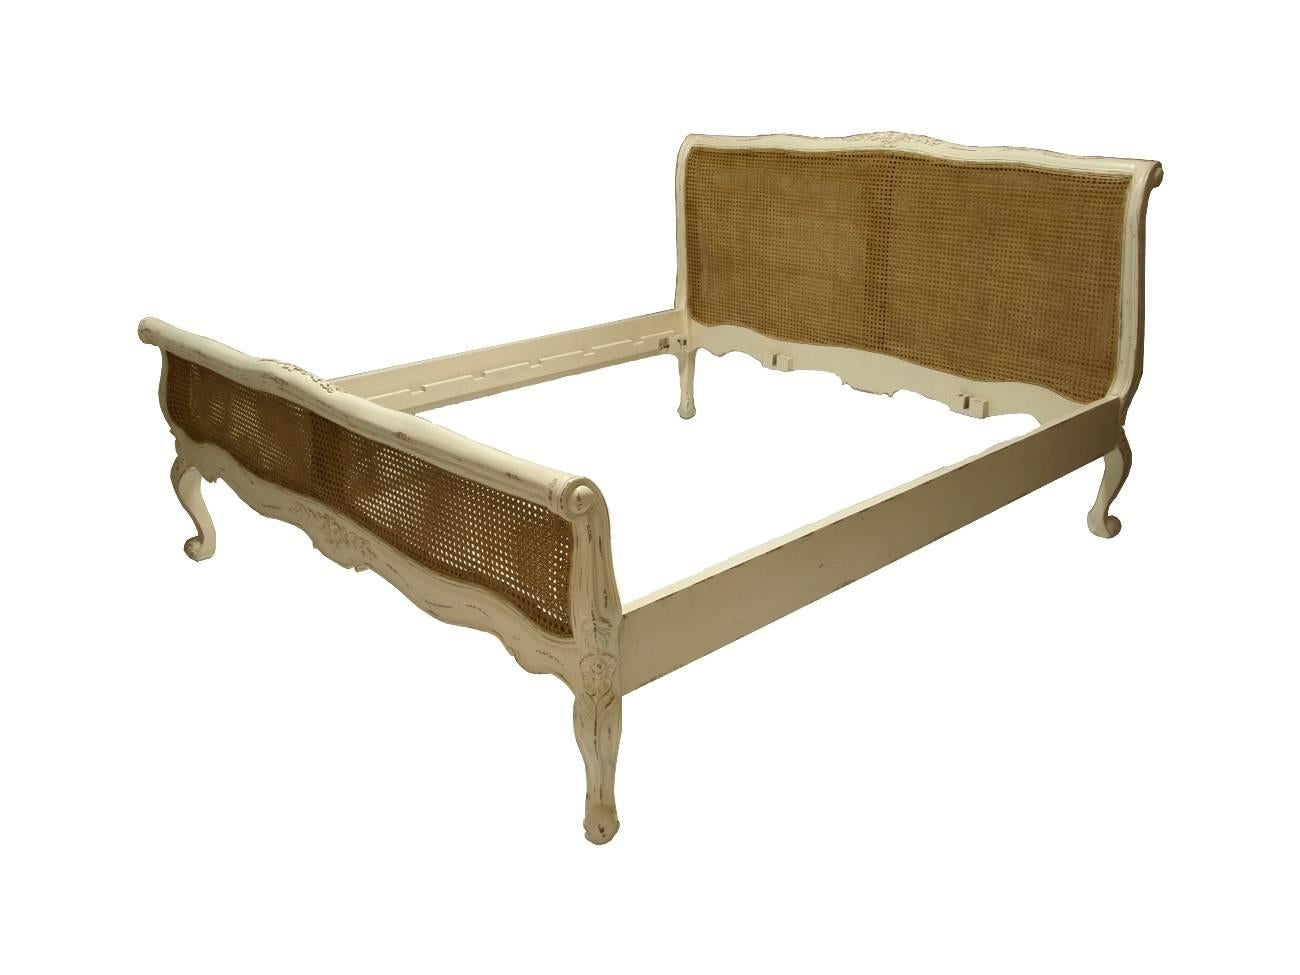 Beautiful French bed in the French Provincial chic style. The solid mahogany wooden frame is finished in light distressed cream finish. Natural cane insert on the head and foot board. Pretty floral handmade carvings shown.
This bed will fit a